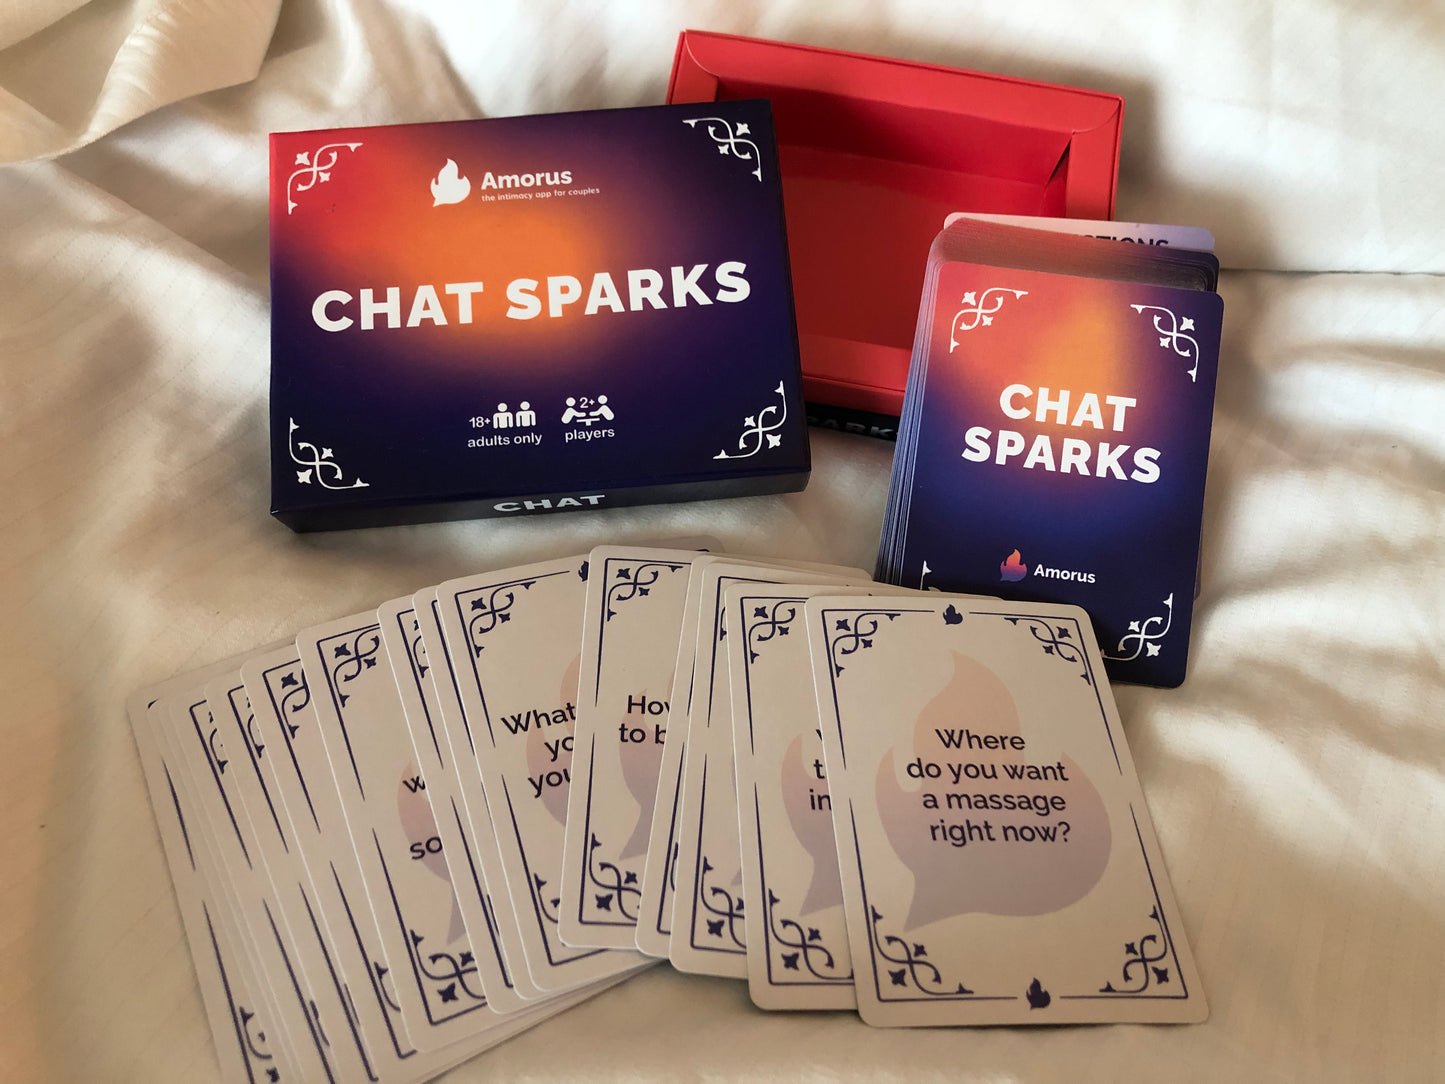 Image of box and Chat Sparks card including question "where do you want a massage right now?"